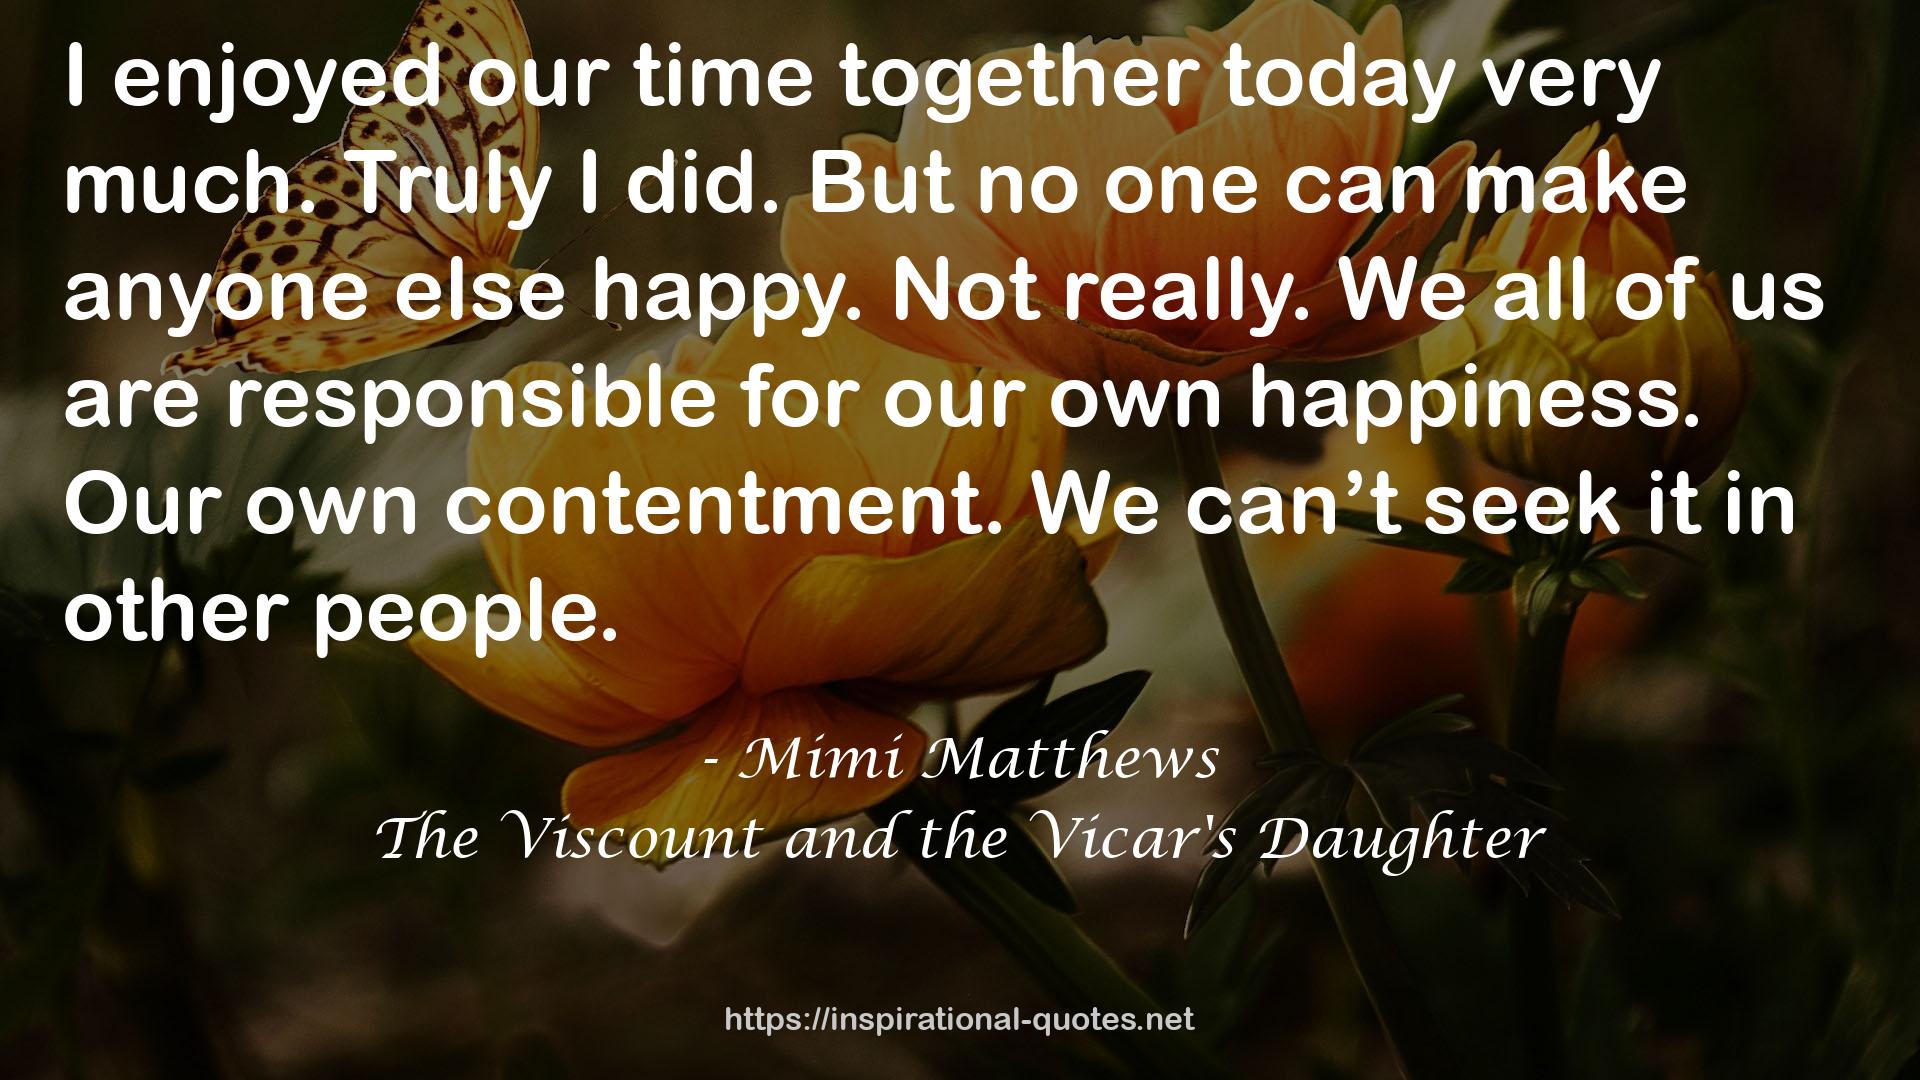 The Viscount and the Vicar's Daughter QUOTES